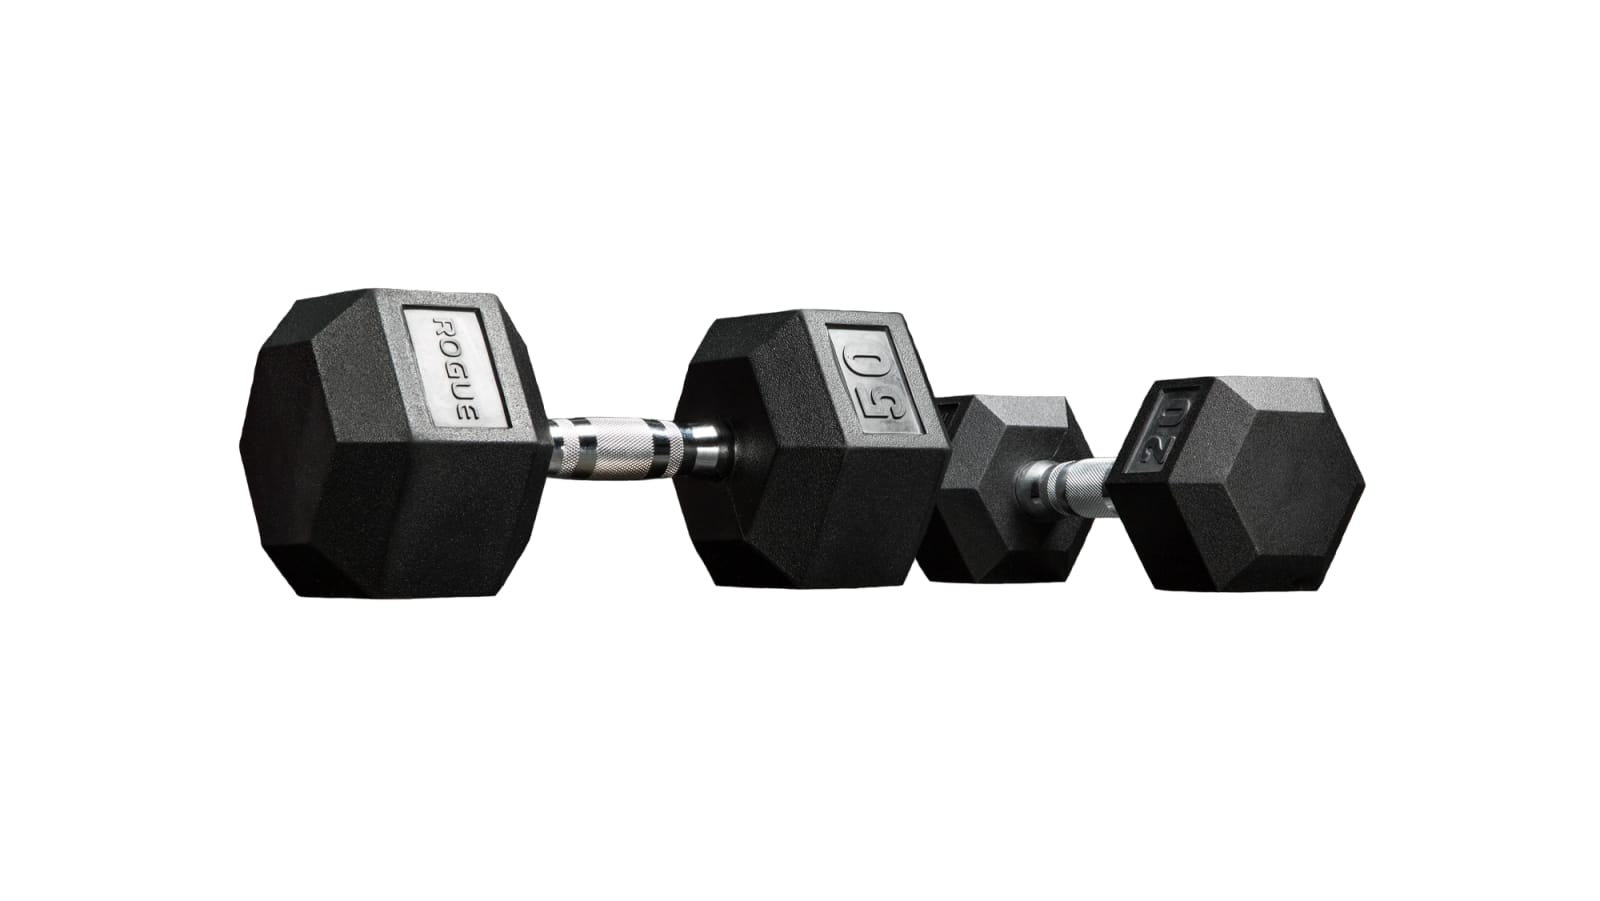 20-100LB POWERT Rubber Hex Dumbbell Weight Lifting Home Gym Training-One Pair 